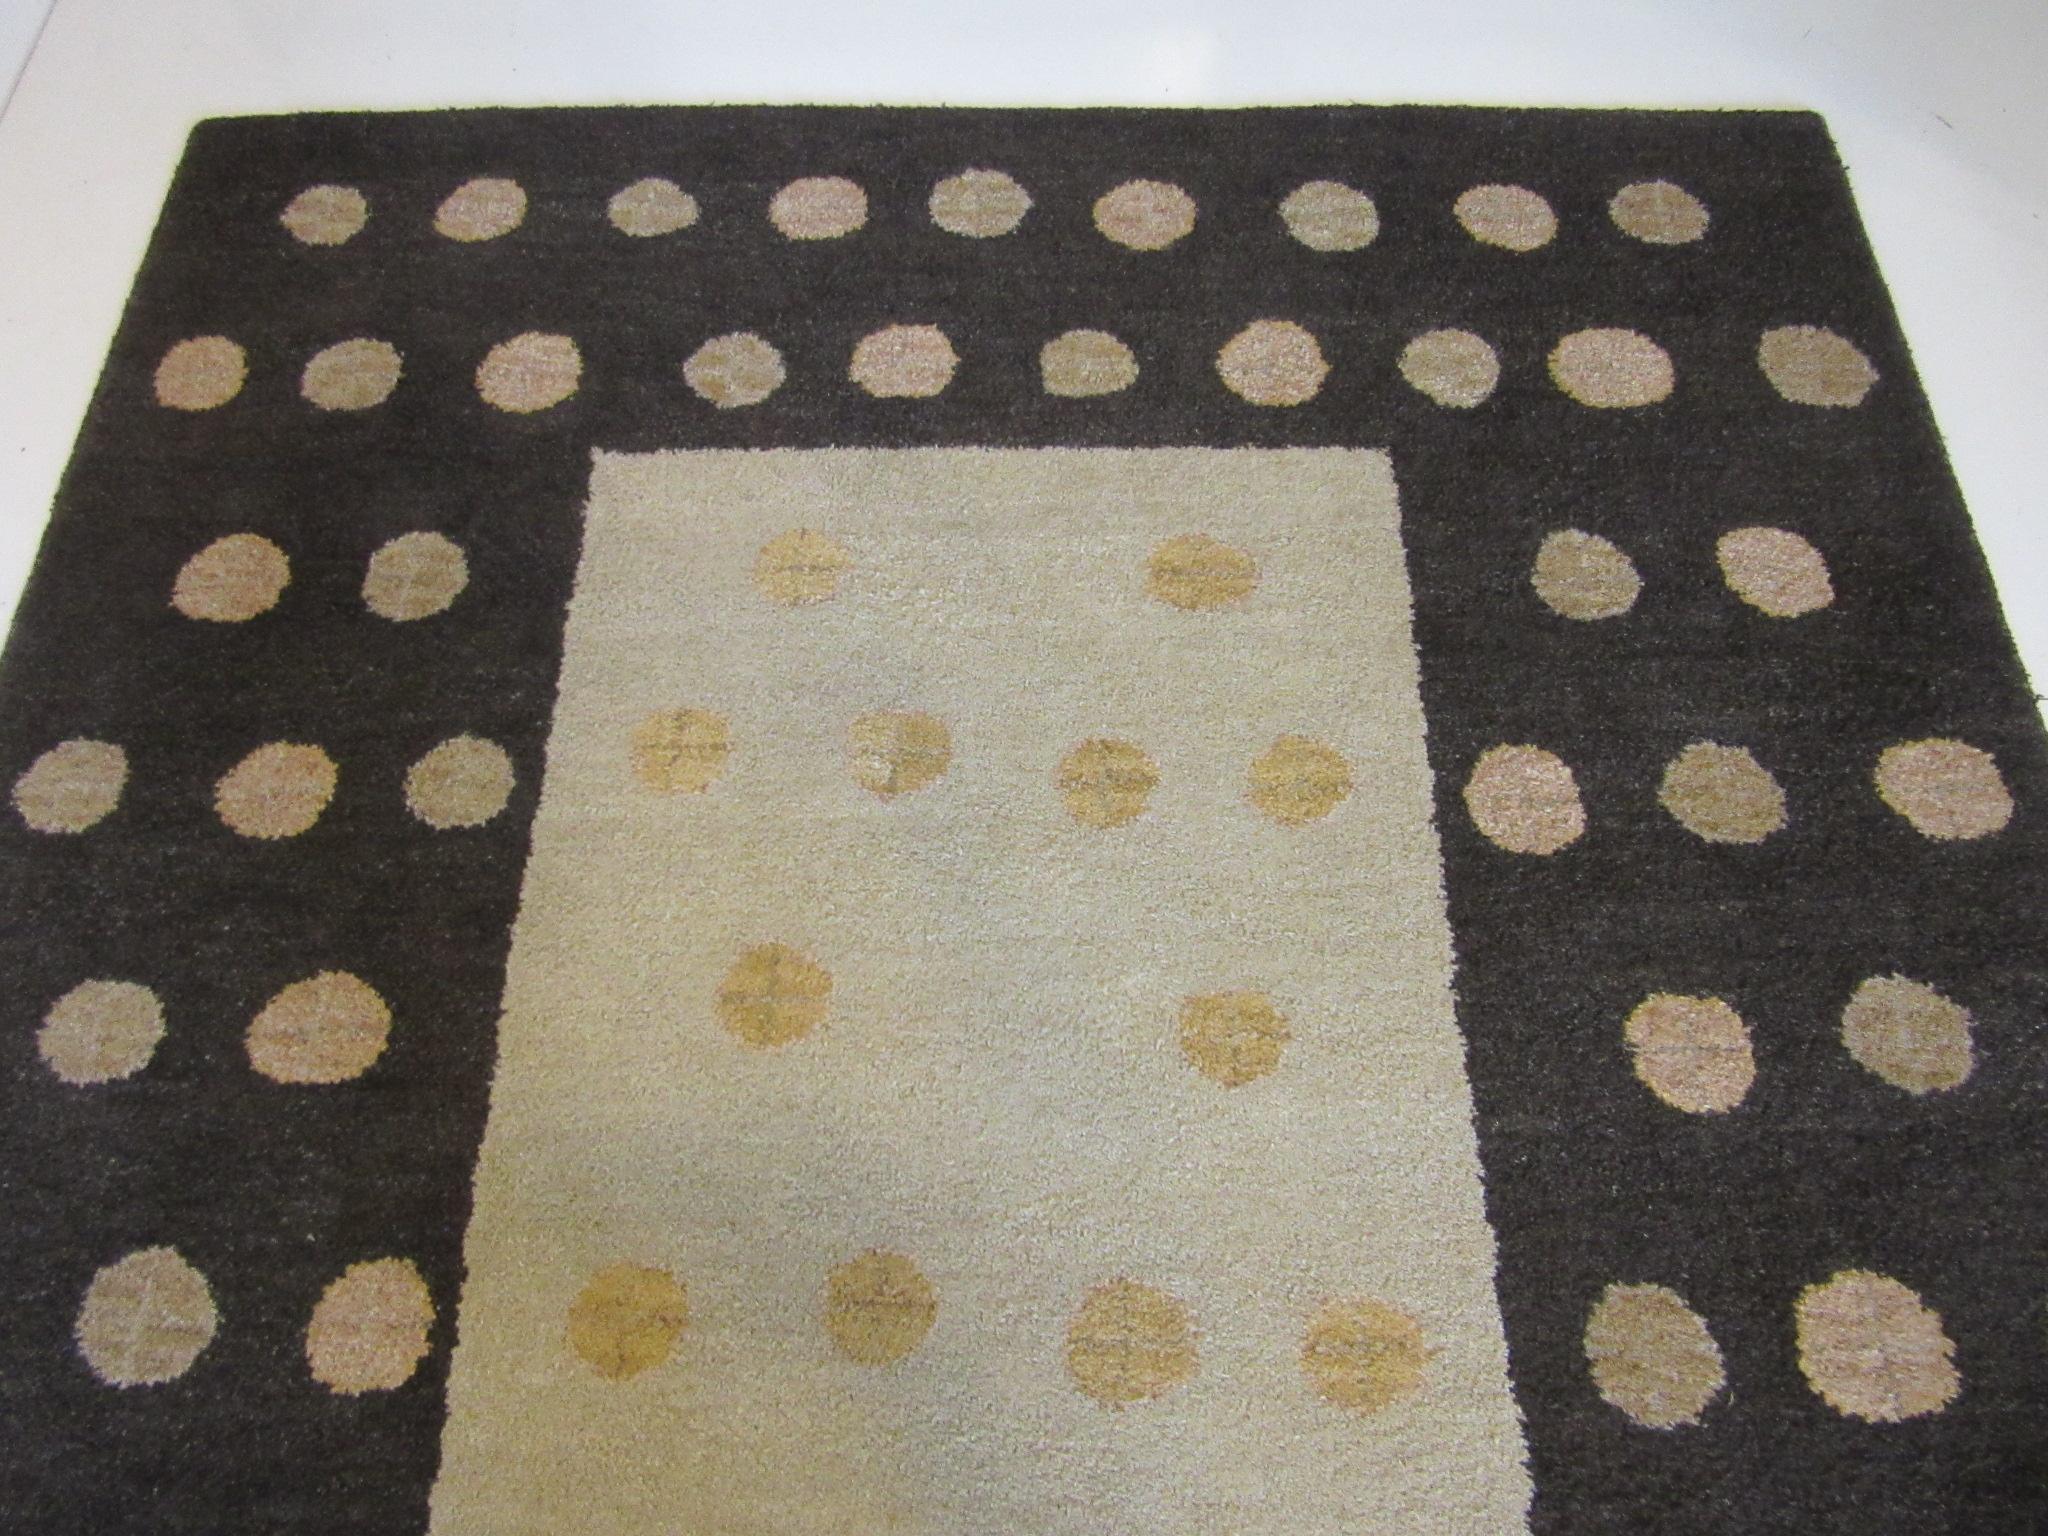 A low cut pile 100% wool contemporary styled designer rug with dark brown, tan, taupe colors having dot and X designs. This rug has a linen backing and serged edges, well crafted and heavy perfect for that room that needs some understated pop.